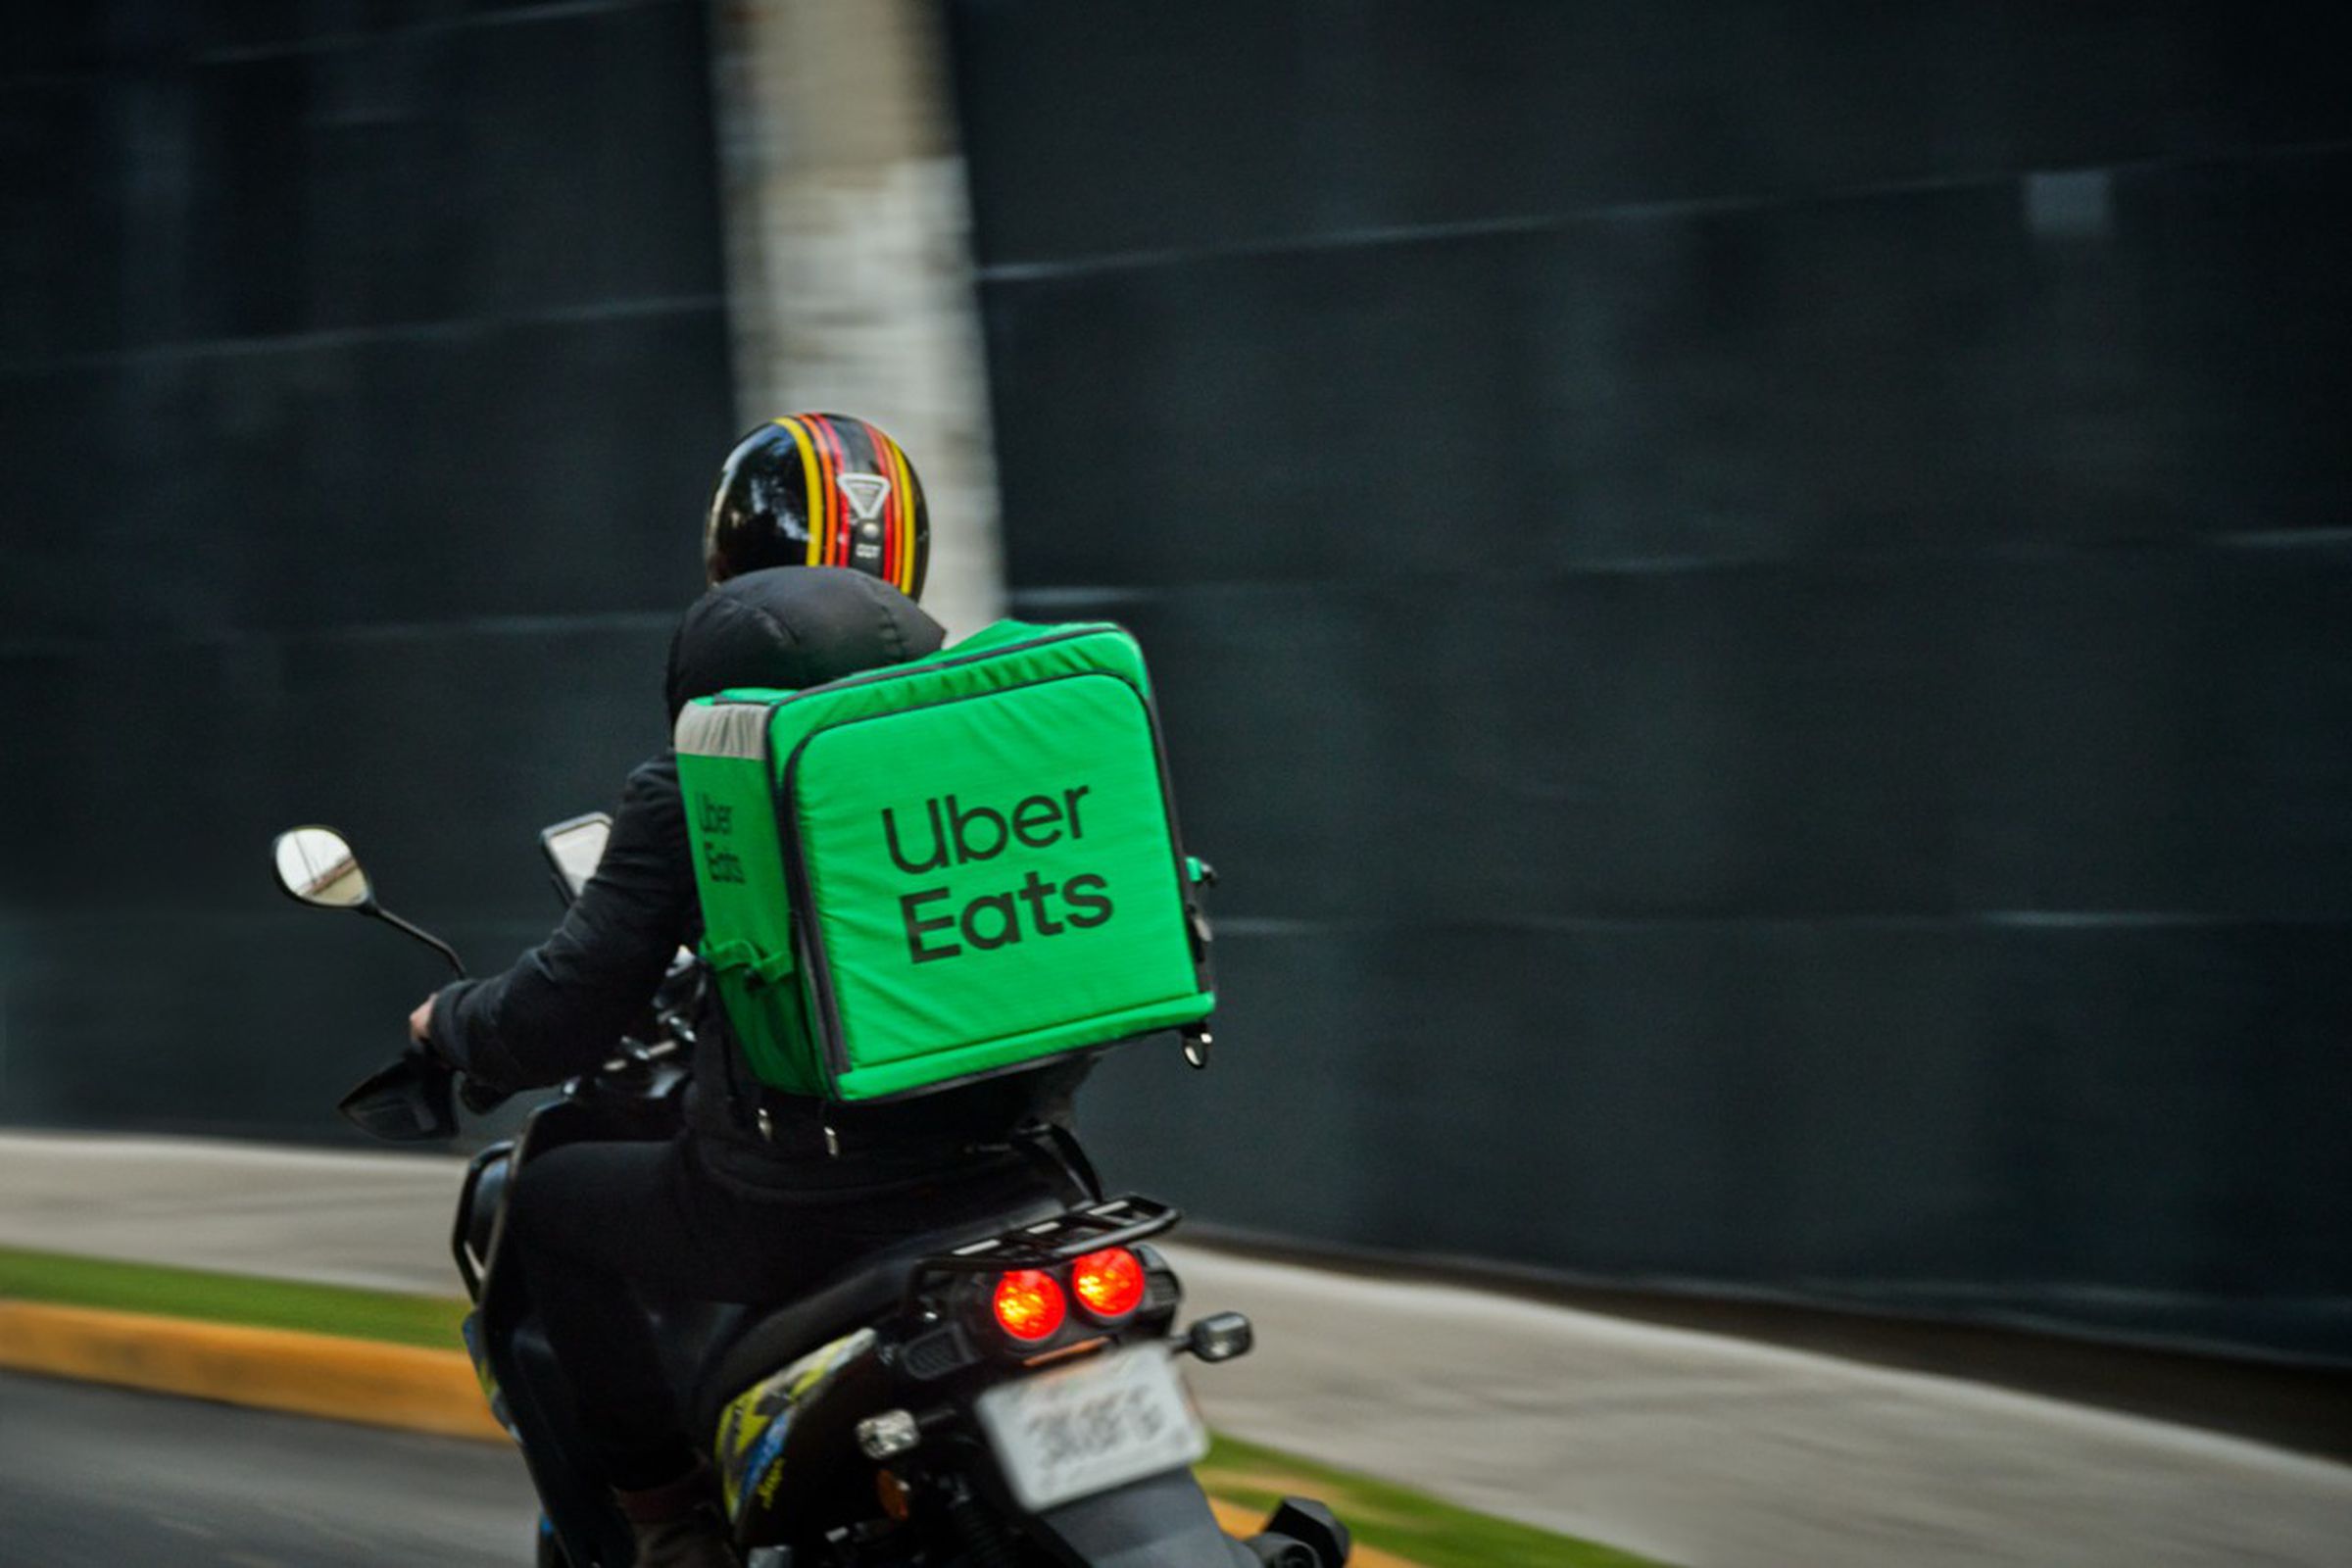 Uber Eats delivery courier on a moped